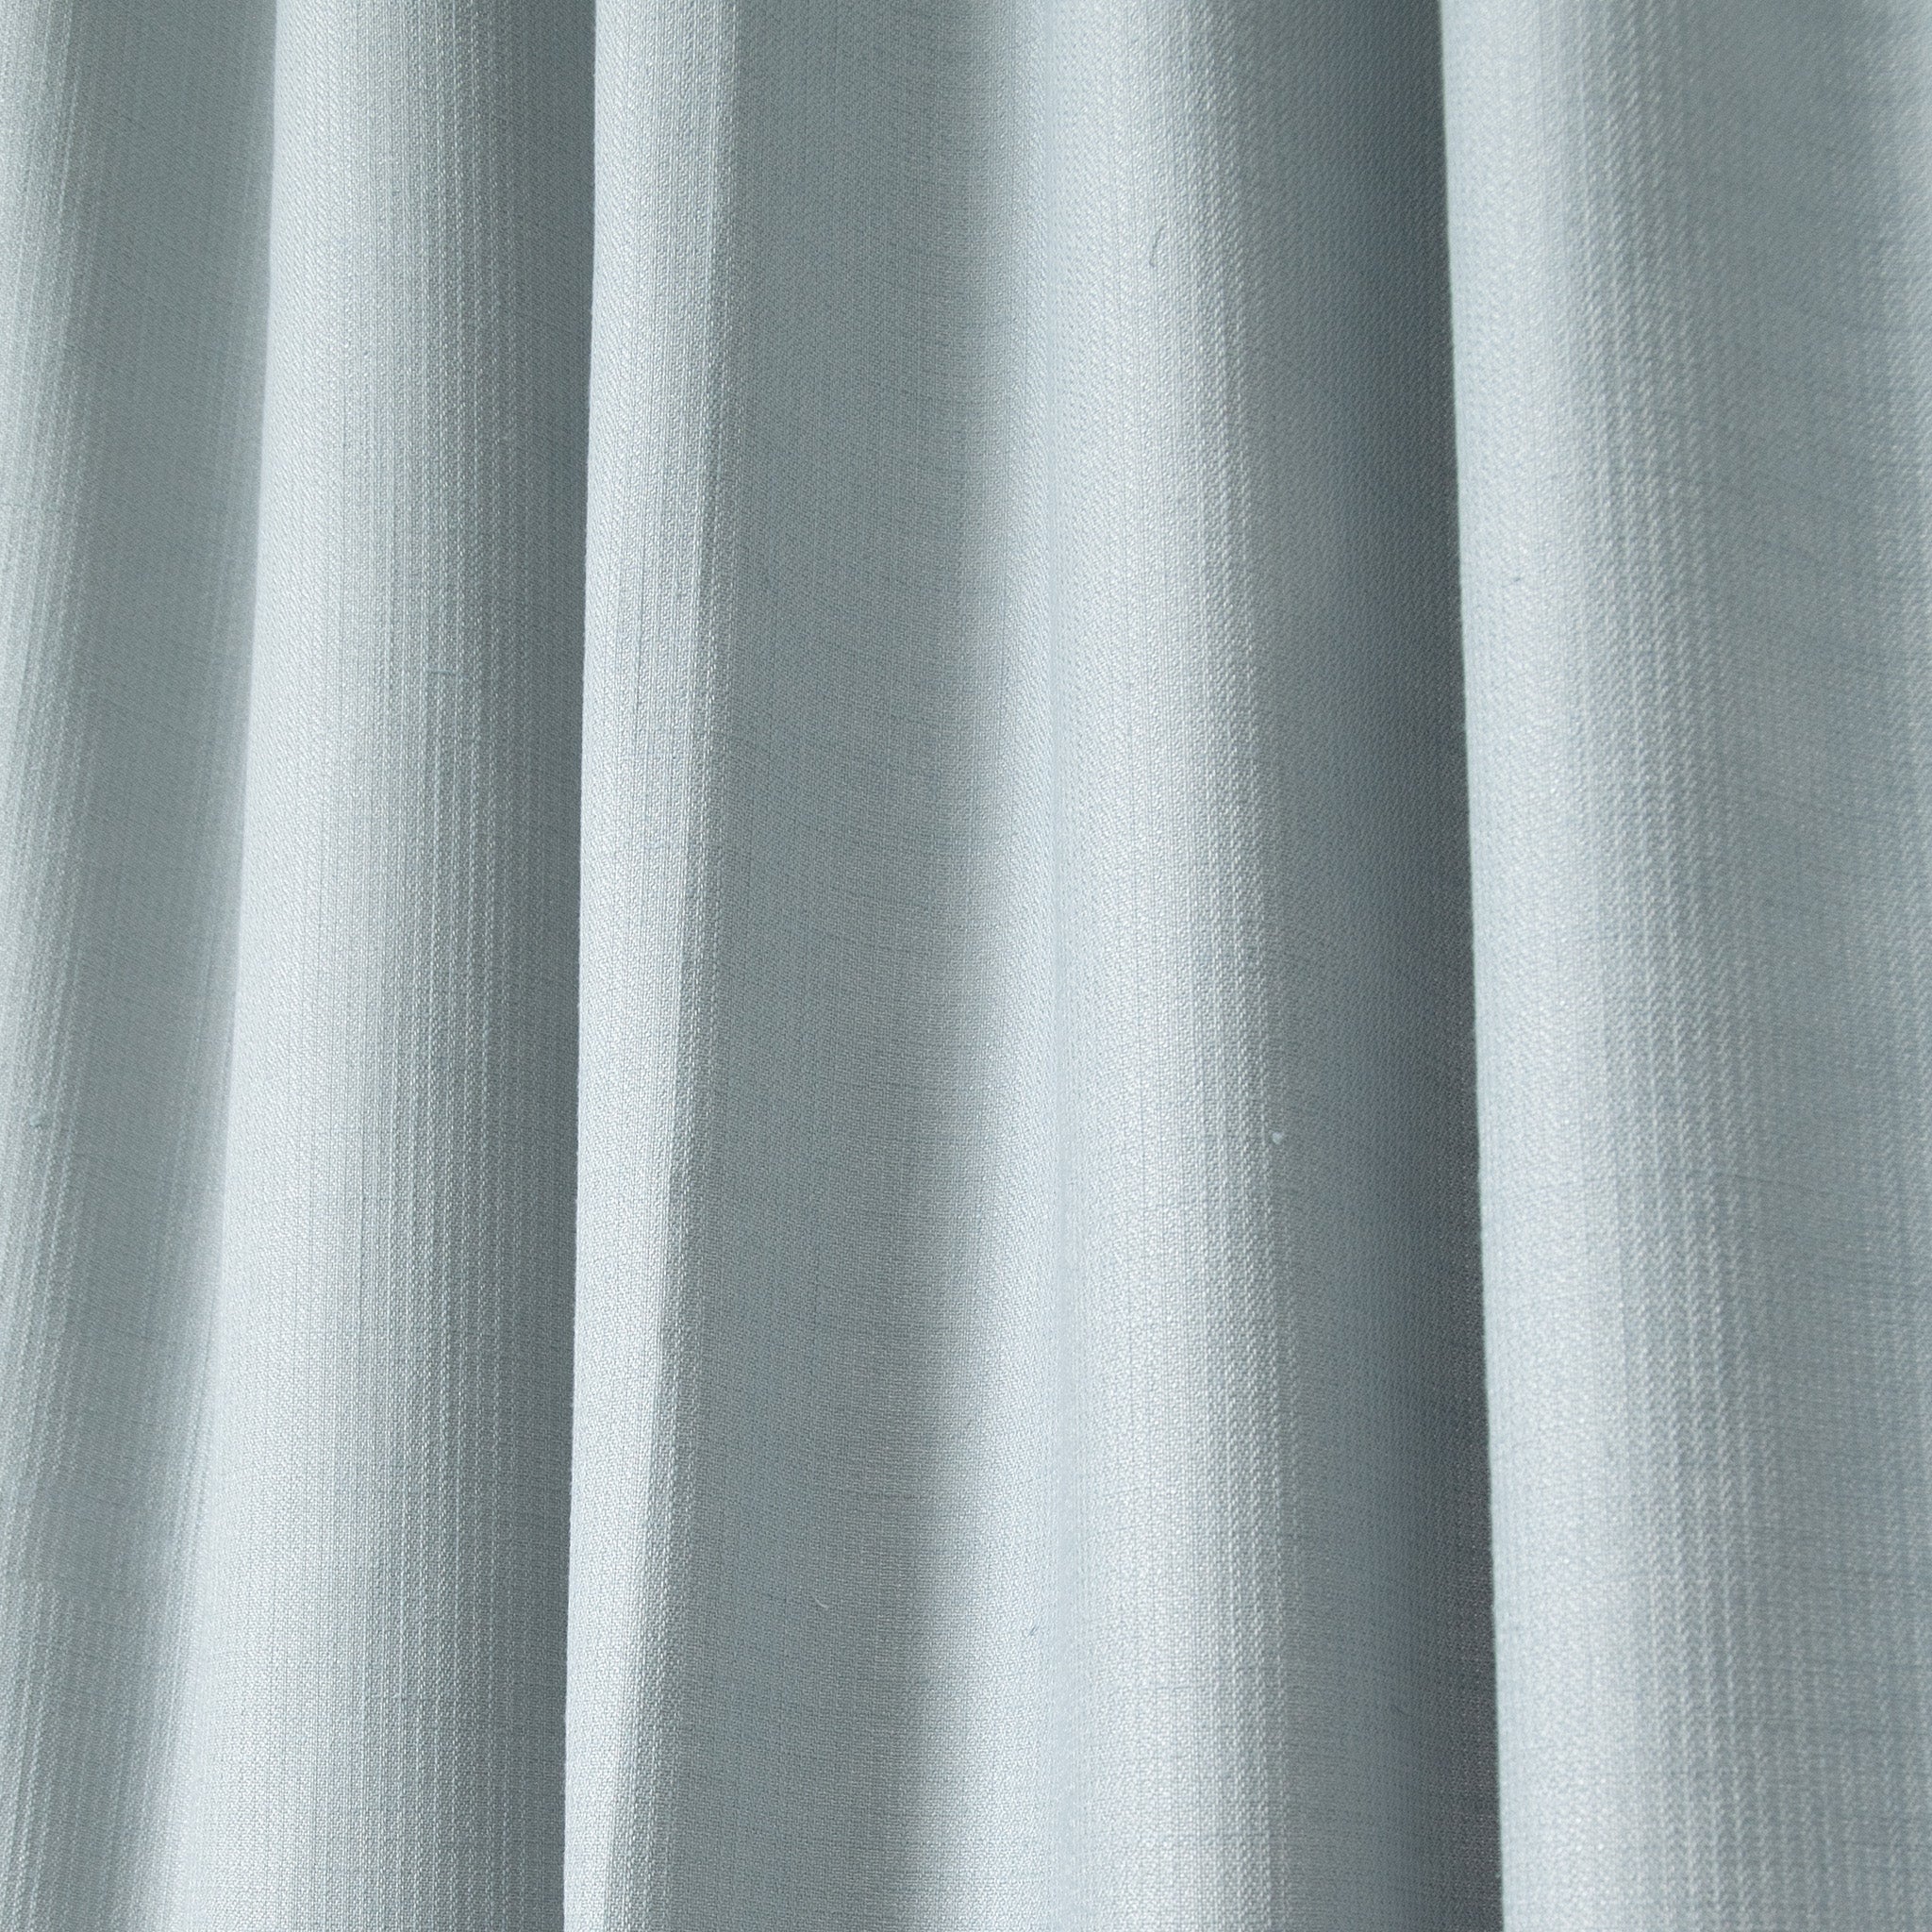 close up of grey blue curtains